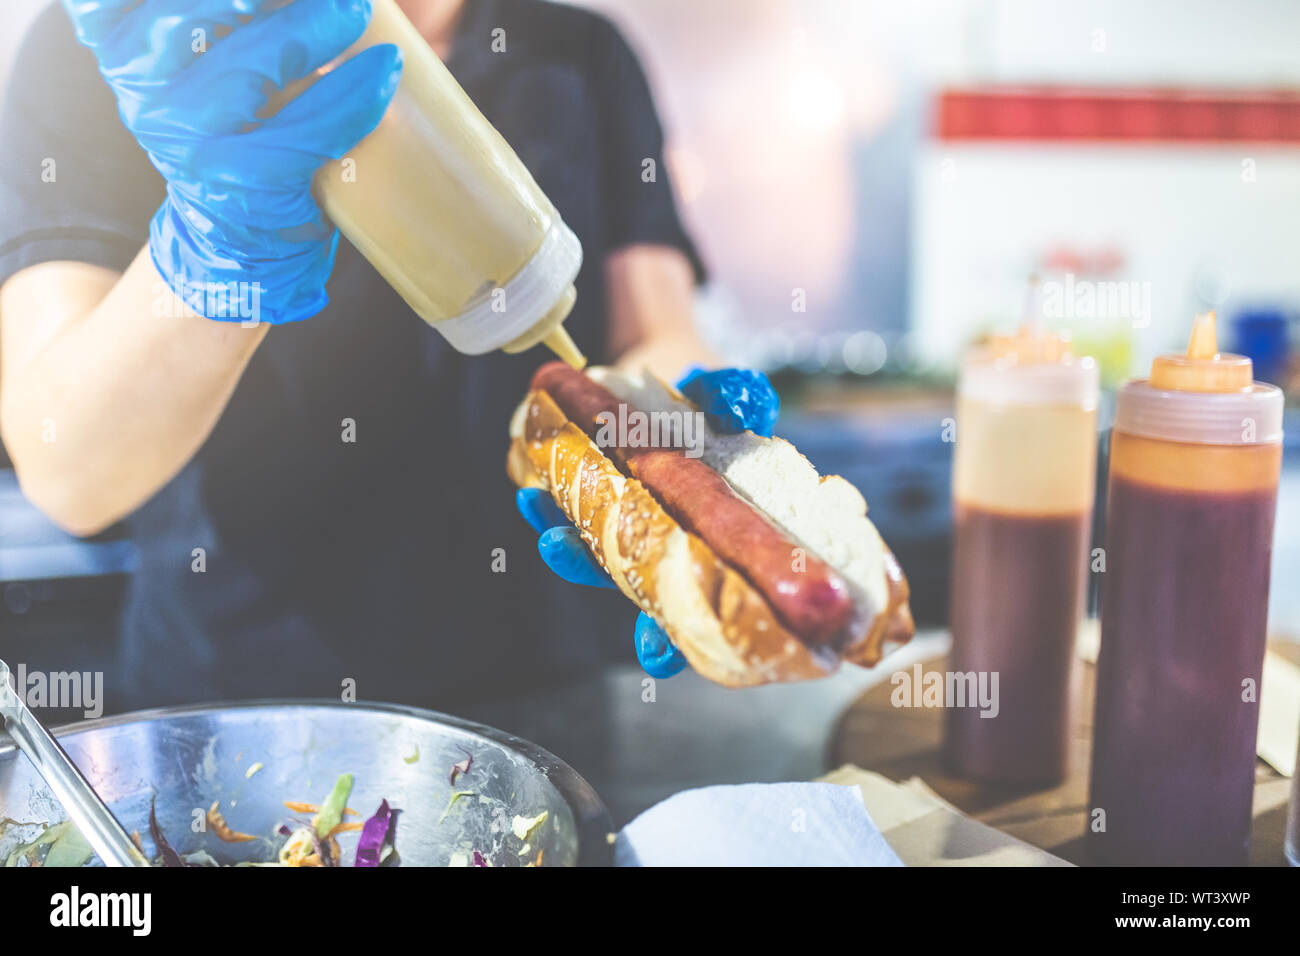 Close up of chef hands pouring mustard on fresh hot dog with grilled sausage. Stock Photo